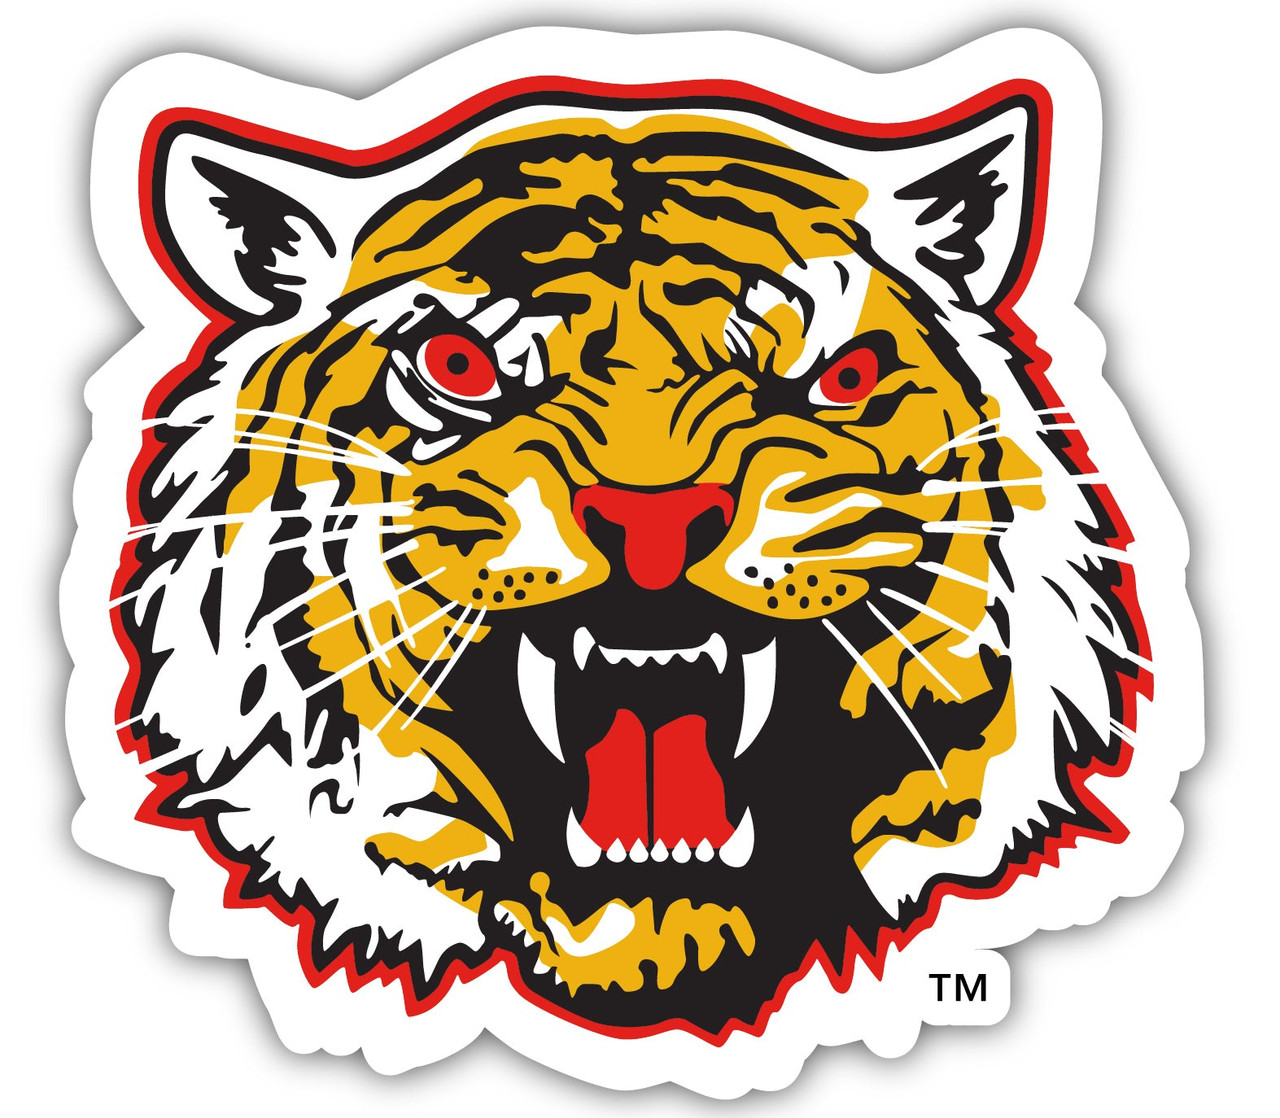 Grambling State Tigers 4 Inch Vinyl Decal Sticker